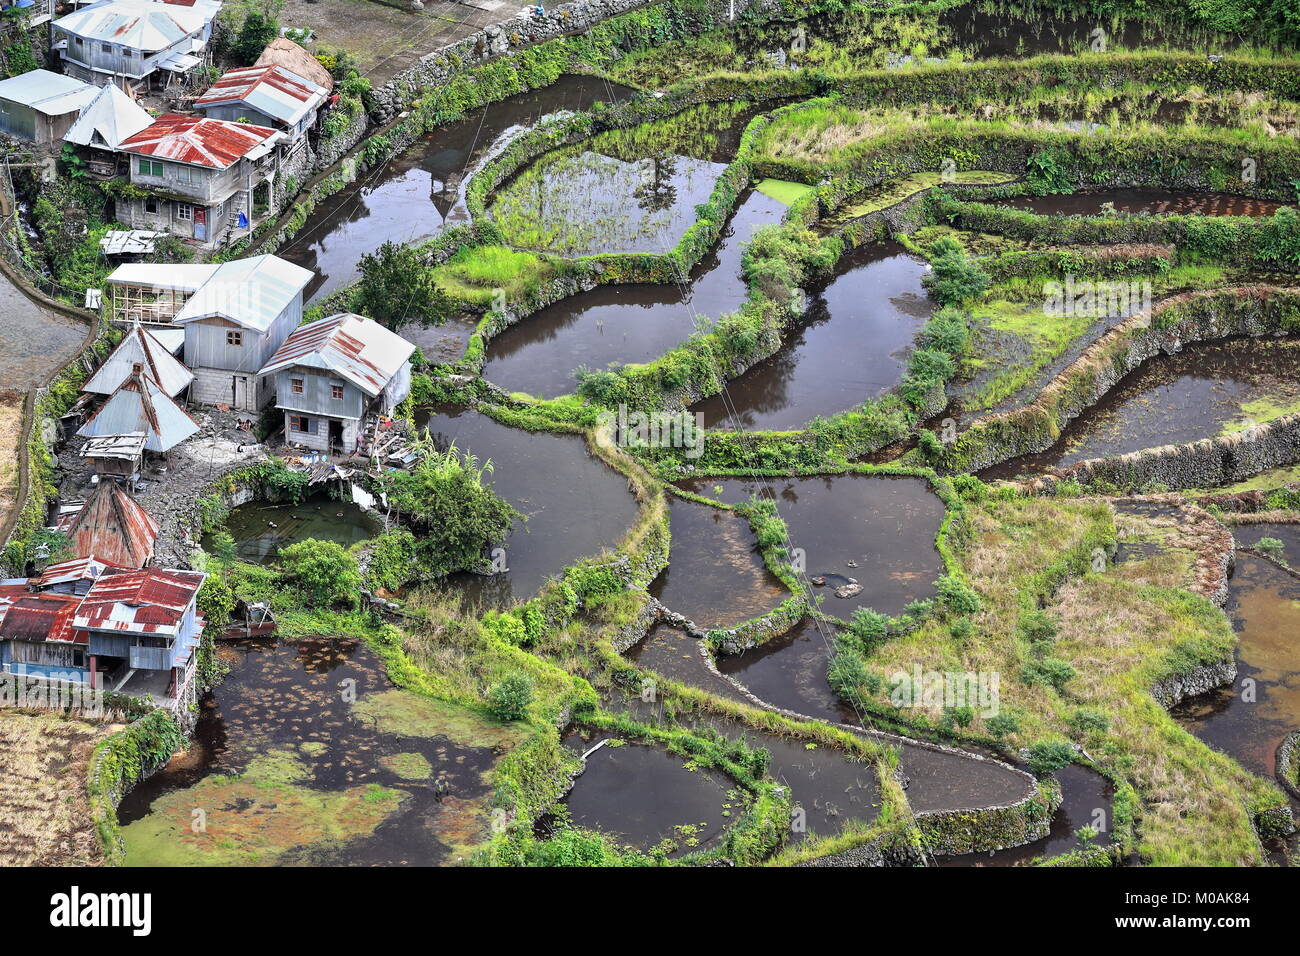 The Batad village cluster-part of the Rice Terraces of the Philippine Cordilleras UNESCO World Heritage Site in the cultural landscape category. Banau Stock Photo